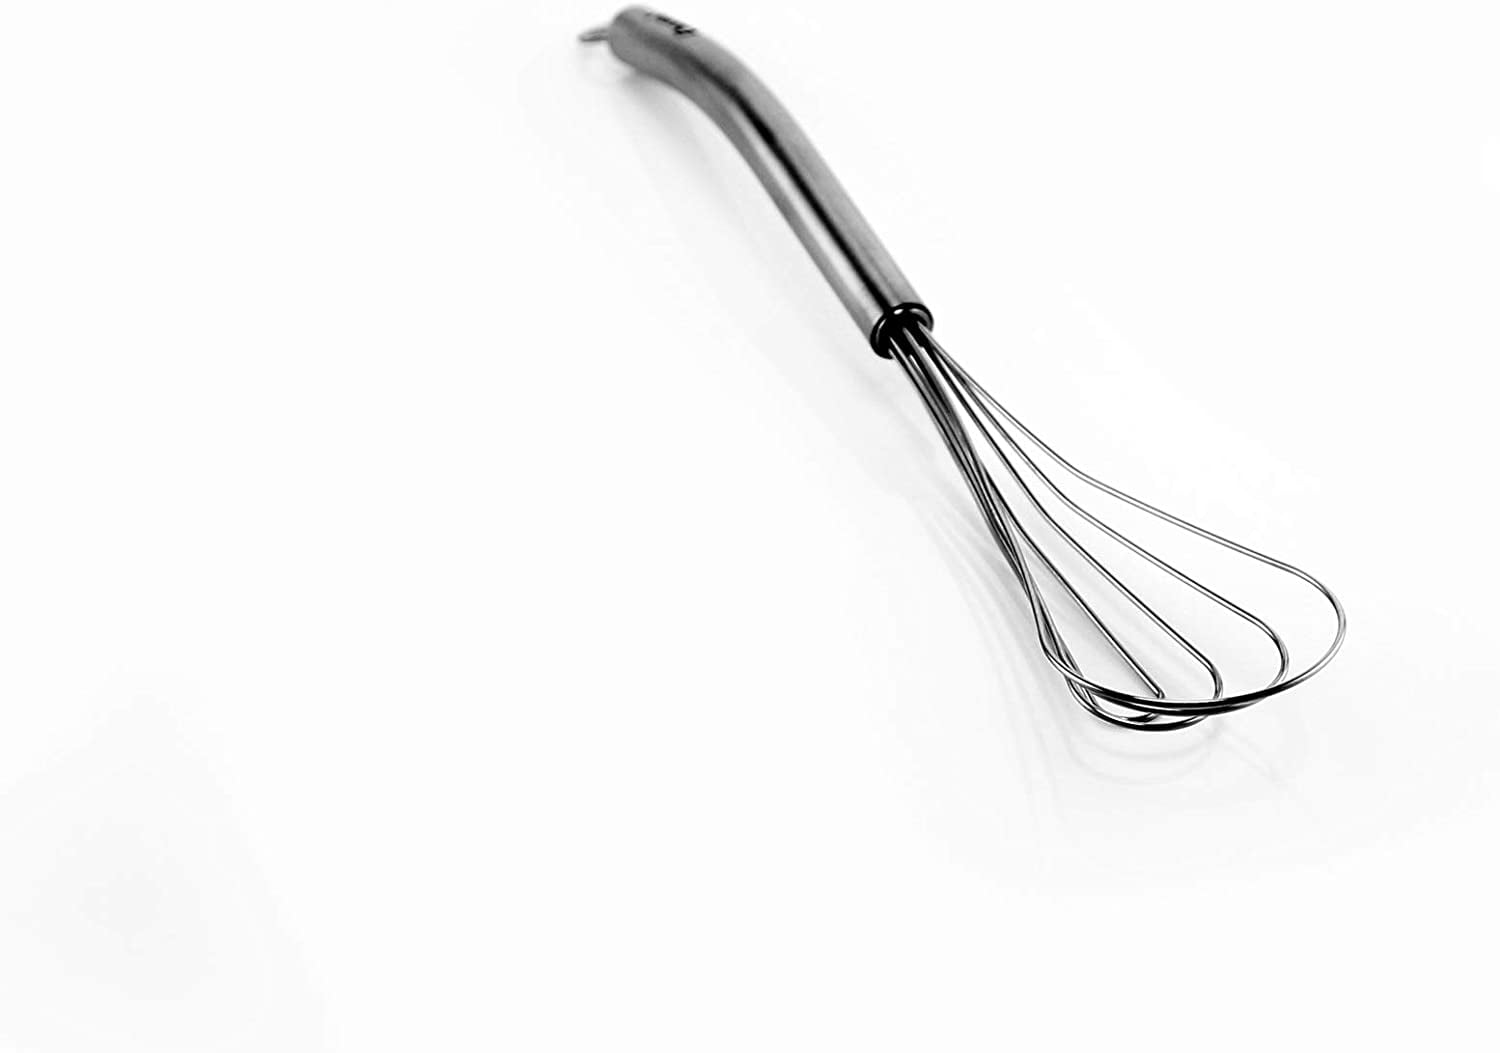 8-Inch 304 Stainless Steel wire whisk Rust resistant and nonstick